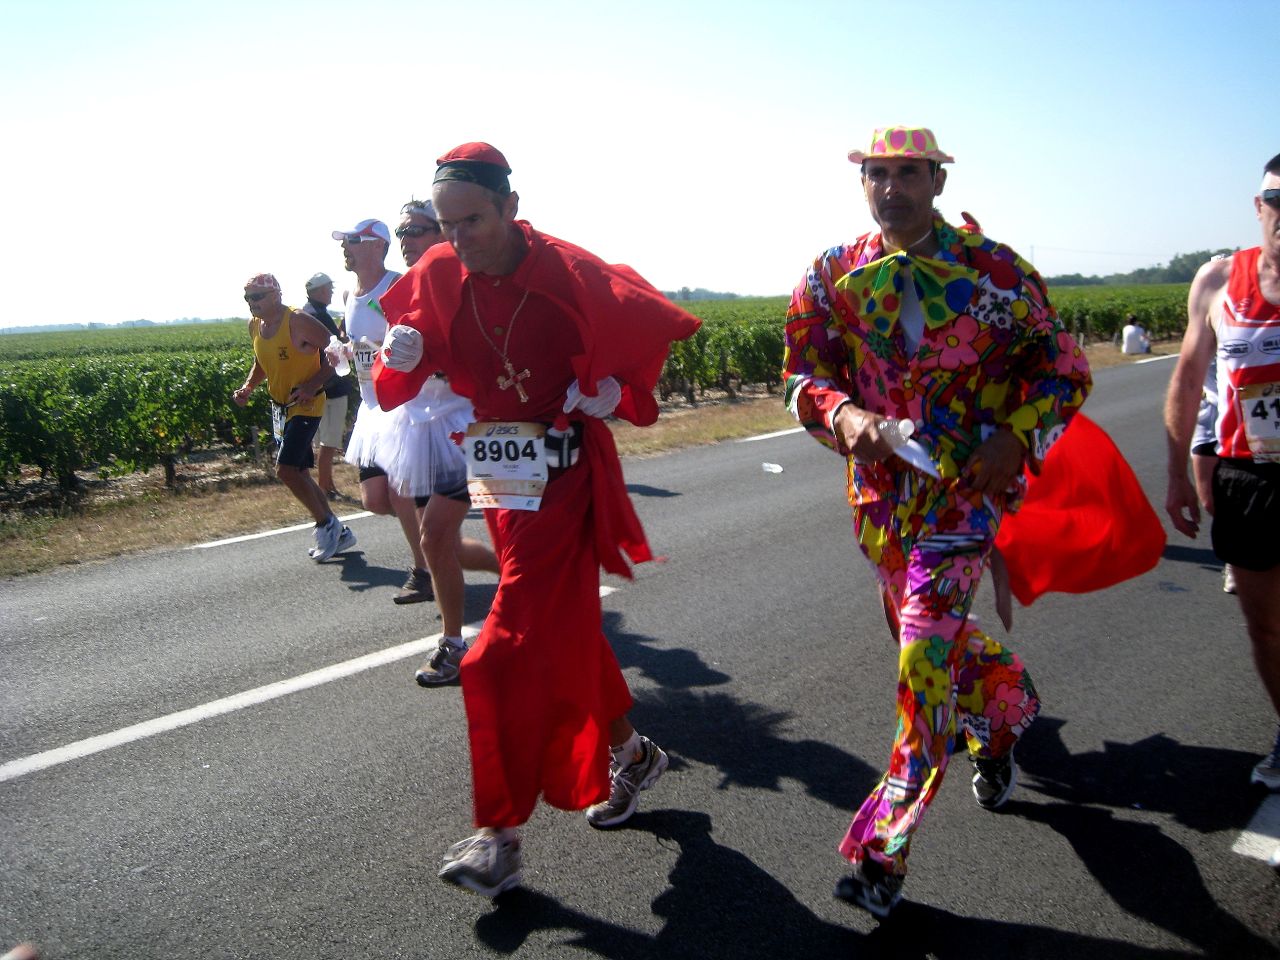 Steak, ice cream and oysters are some of the more lavish refreshments offered to runners of the Medoc Marathon.